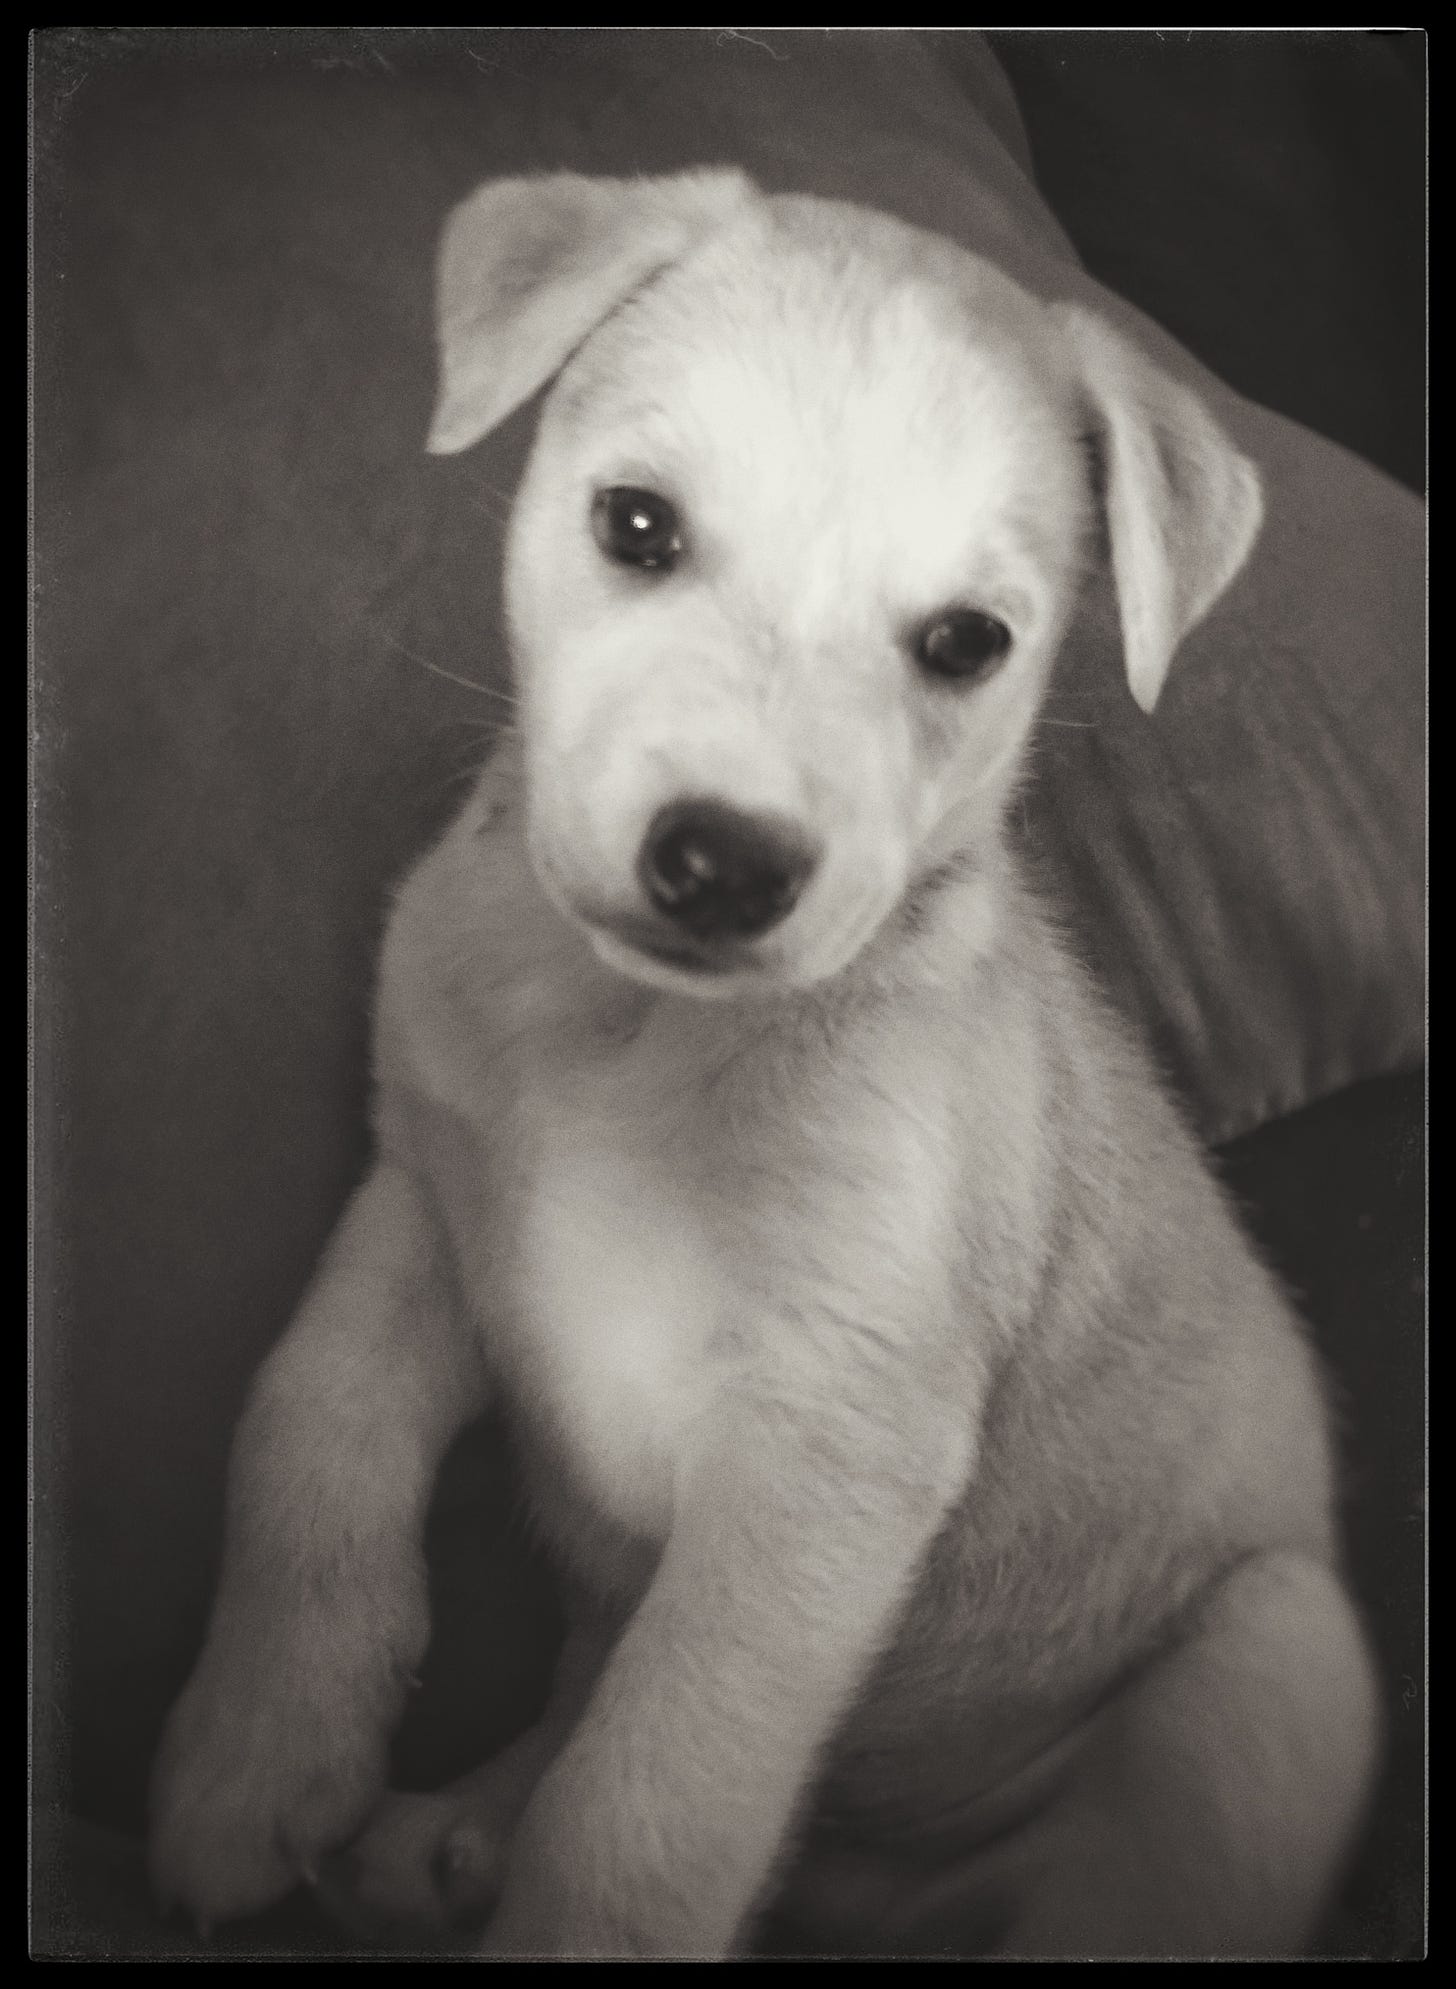 baby Felix in black and white